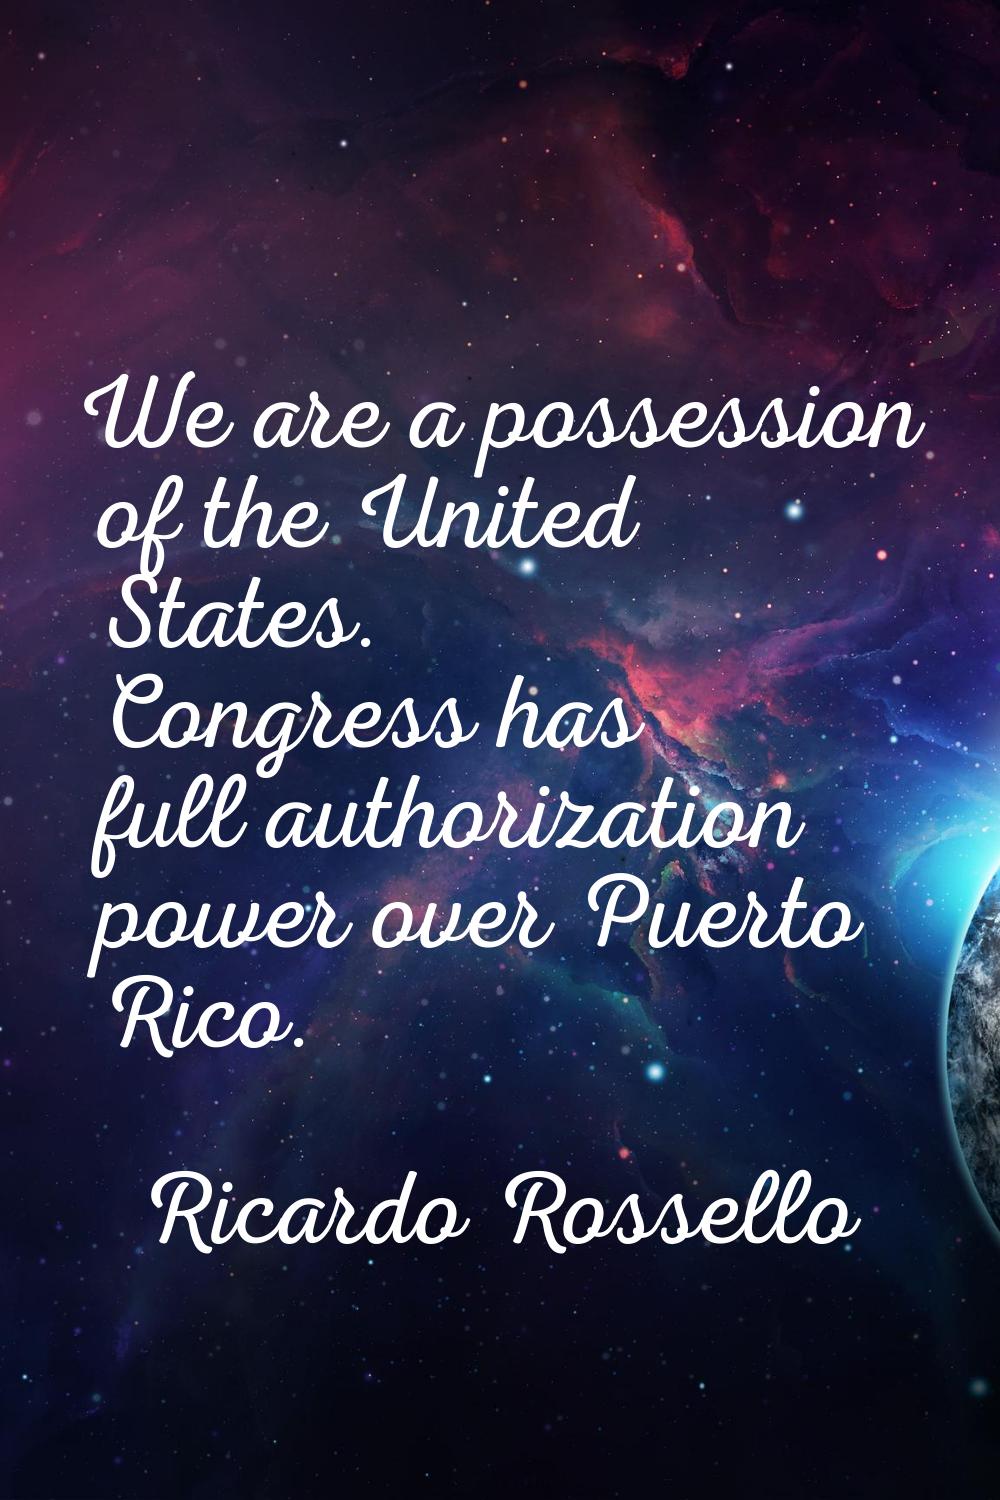 We are a possession of the United States. Congress has full authorization power over Puerto Rico.